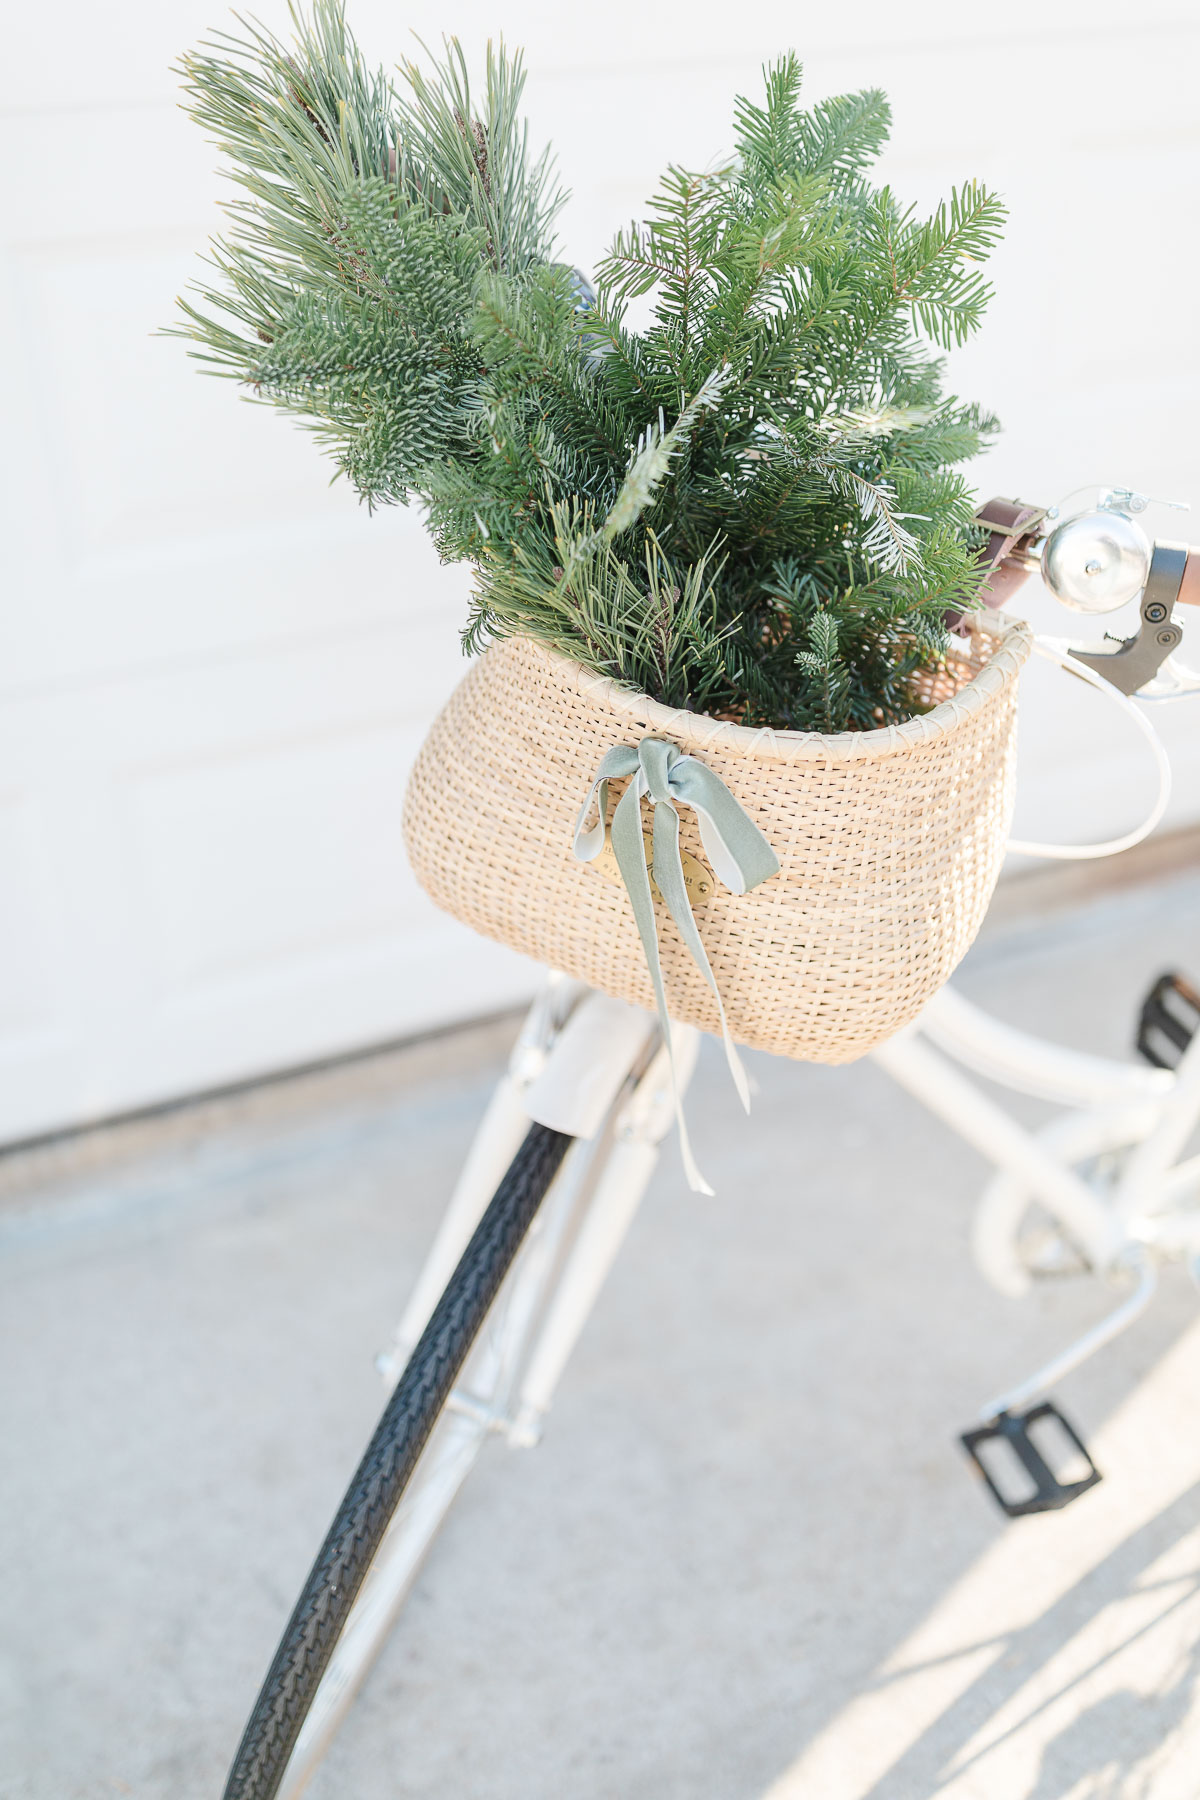 In celebration of Cyber Monday, a festive wicker basket on a bicycle showcases a charmingly decorated Christmas tree.